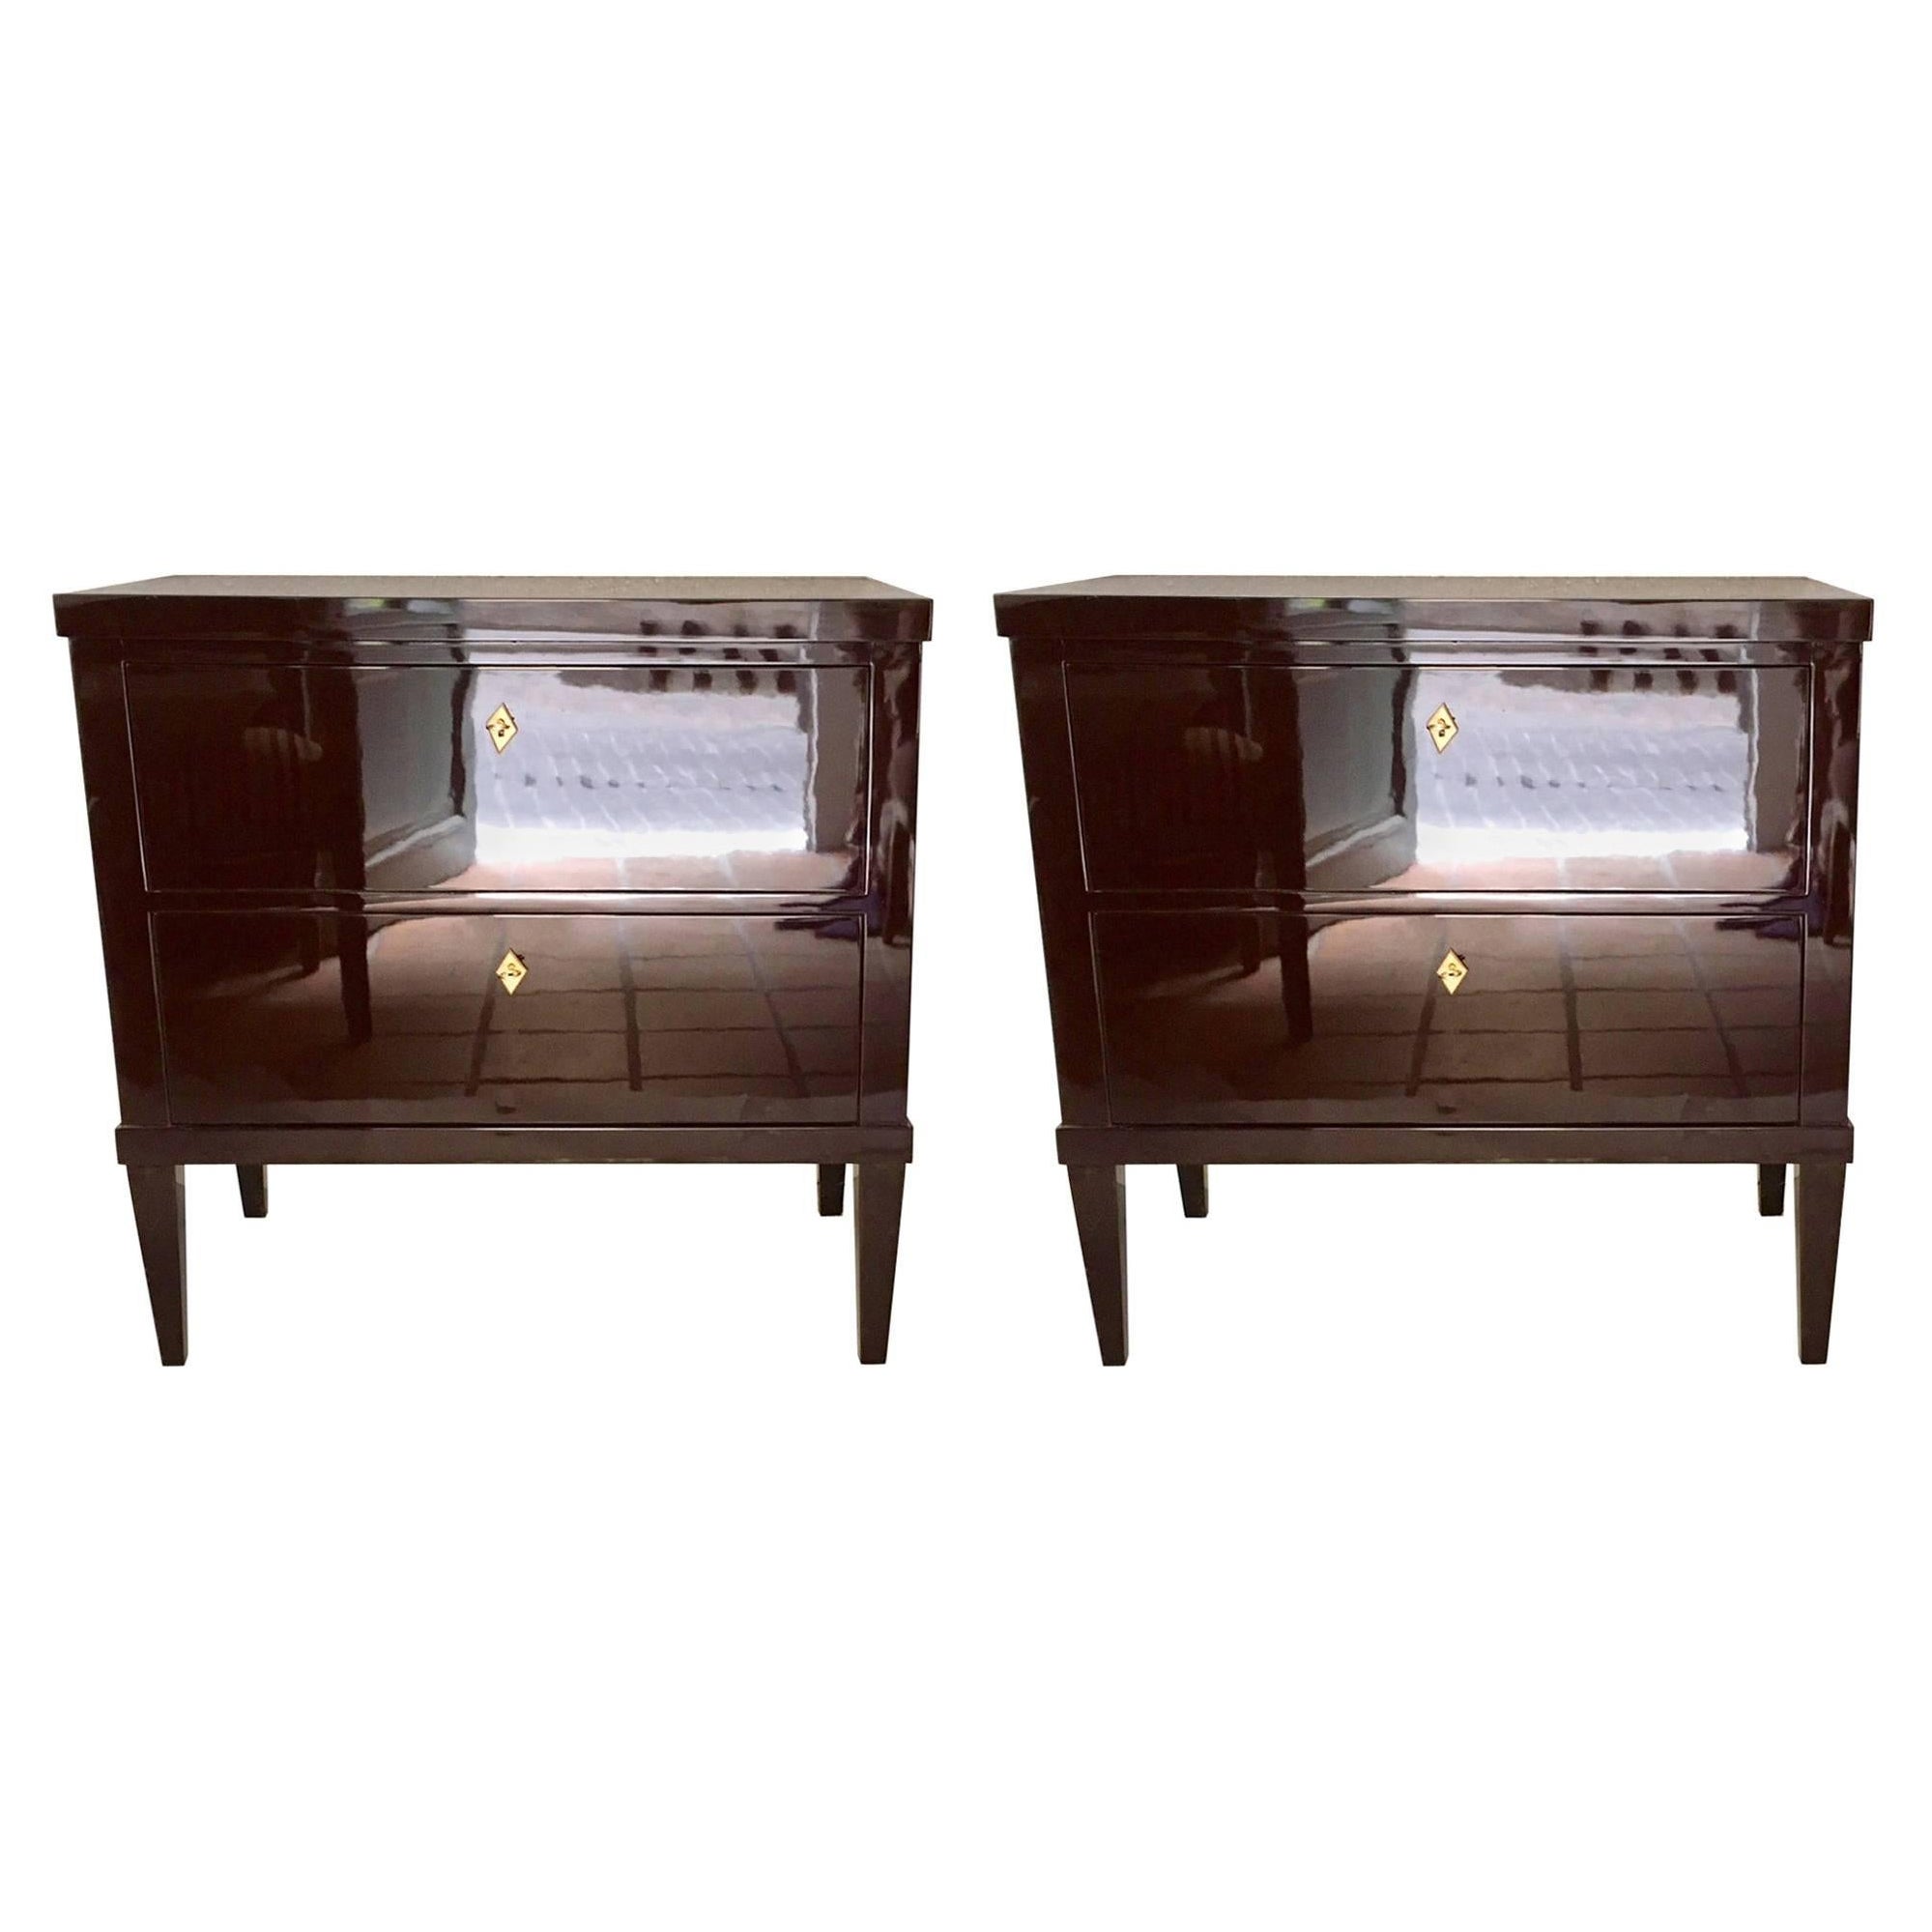 21st Century Pair of Garnet Lacquered Bierdemeier Style Commodes or Nightstands